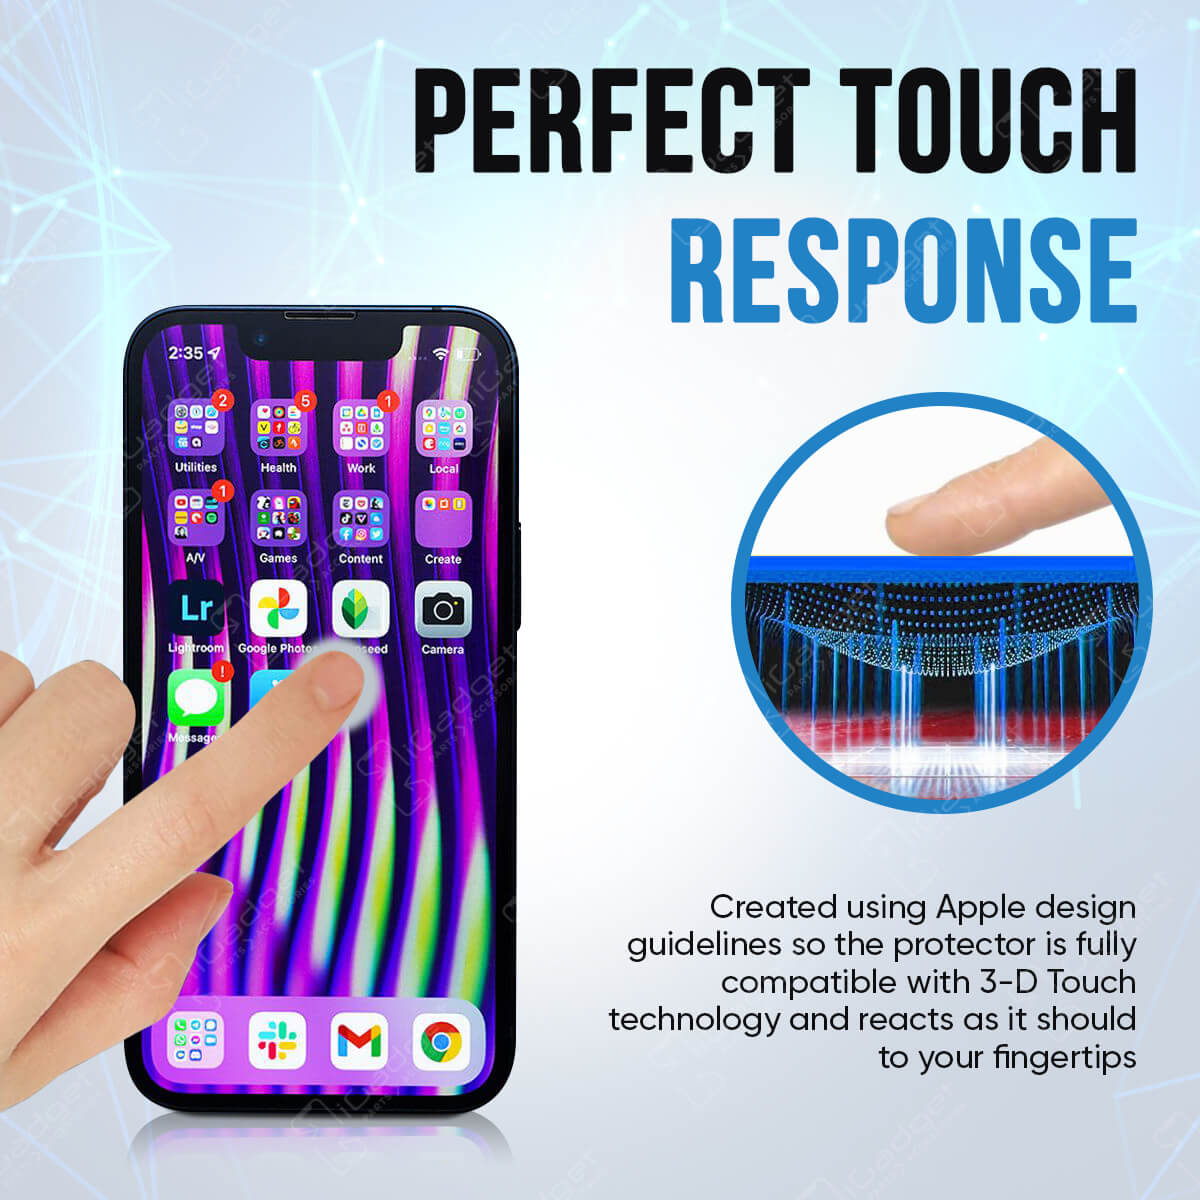 iPhone X/iPhone XS/iPhone 11 Pro Glass Screen Protector Ultra Clear | Case Friendly